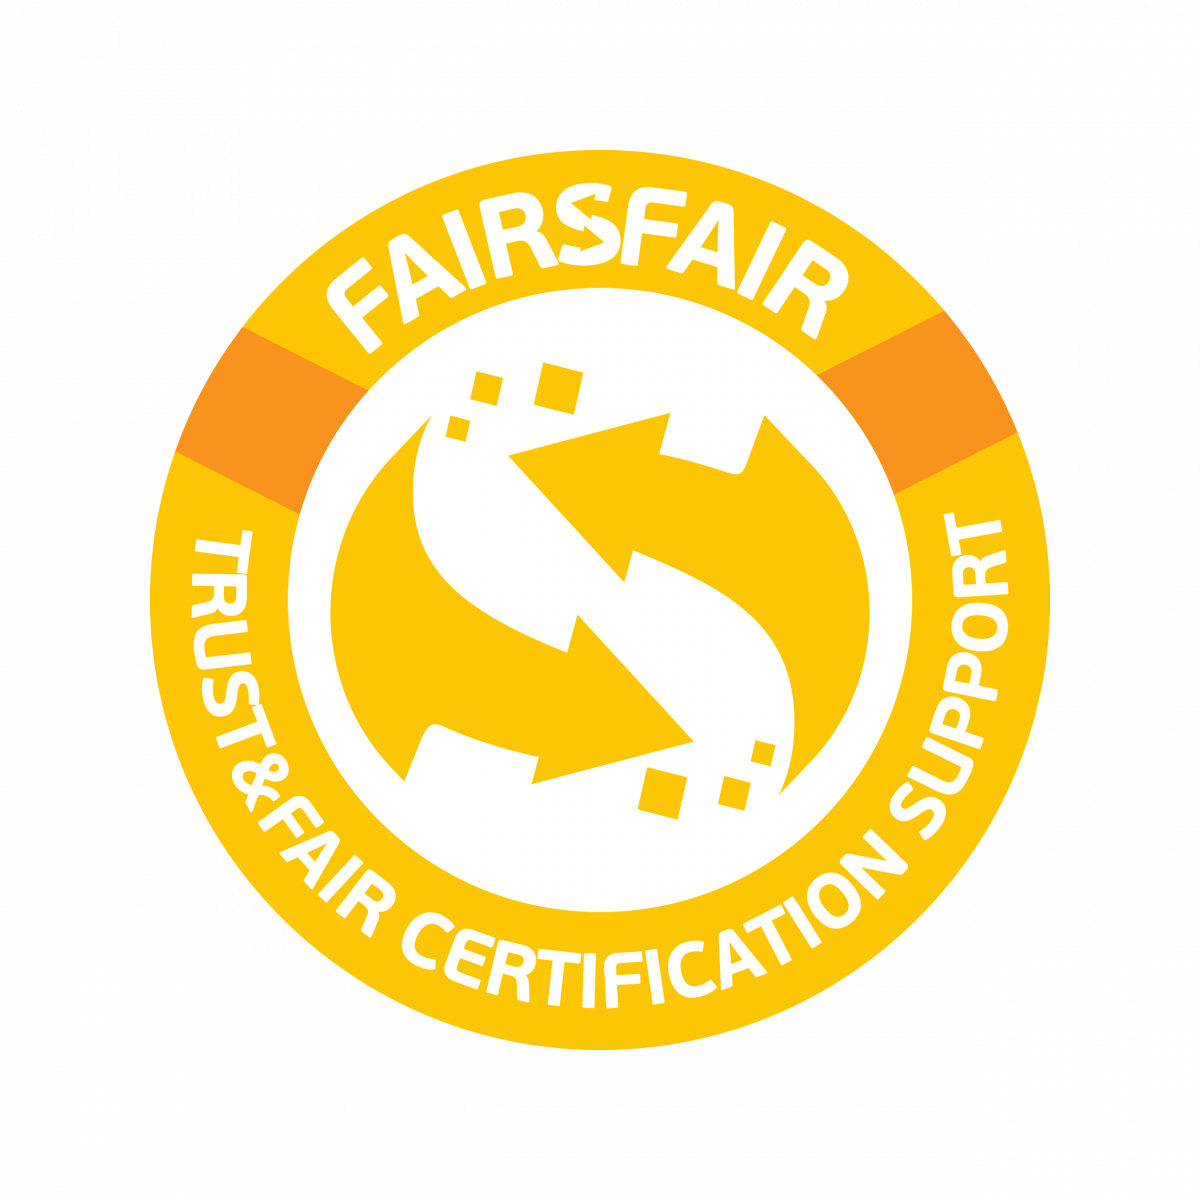 FAIRsFAIR supported repository